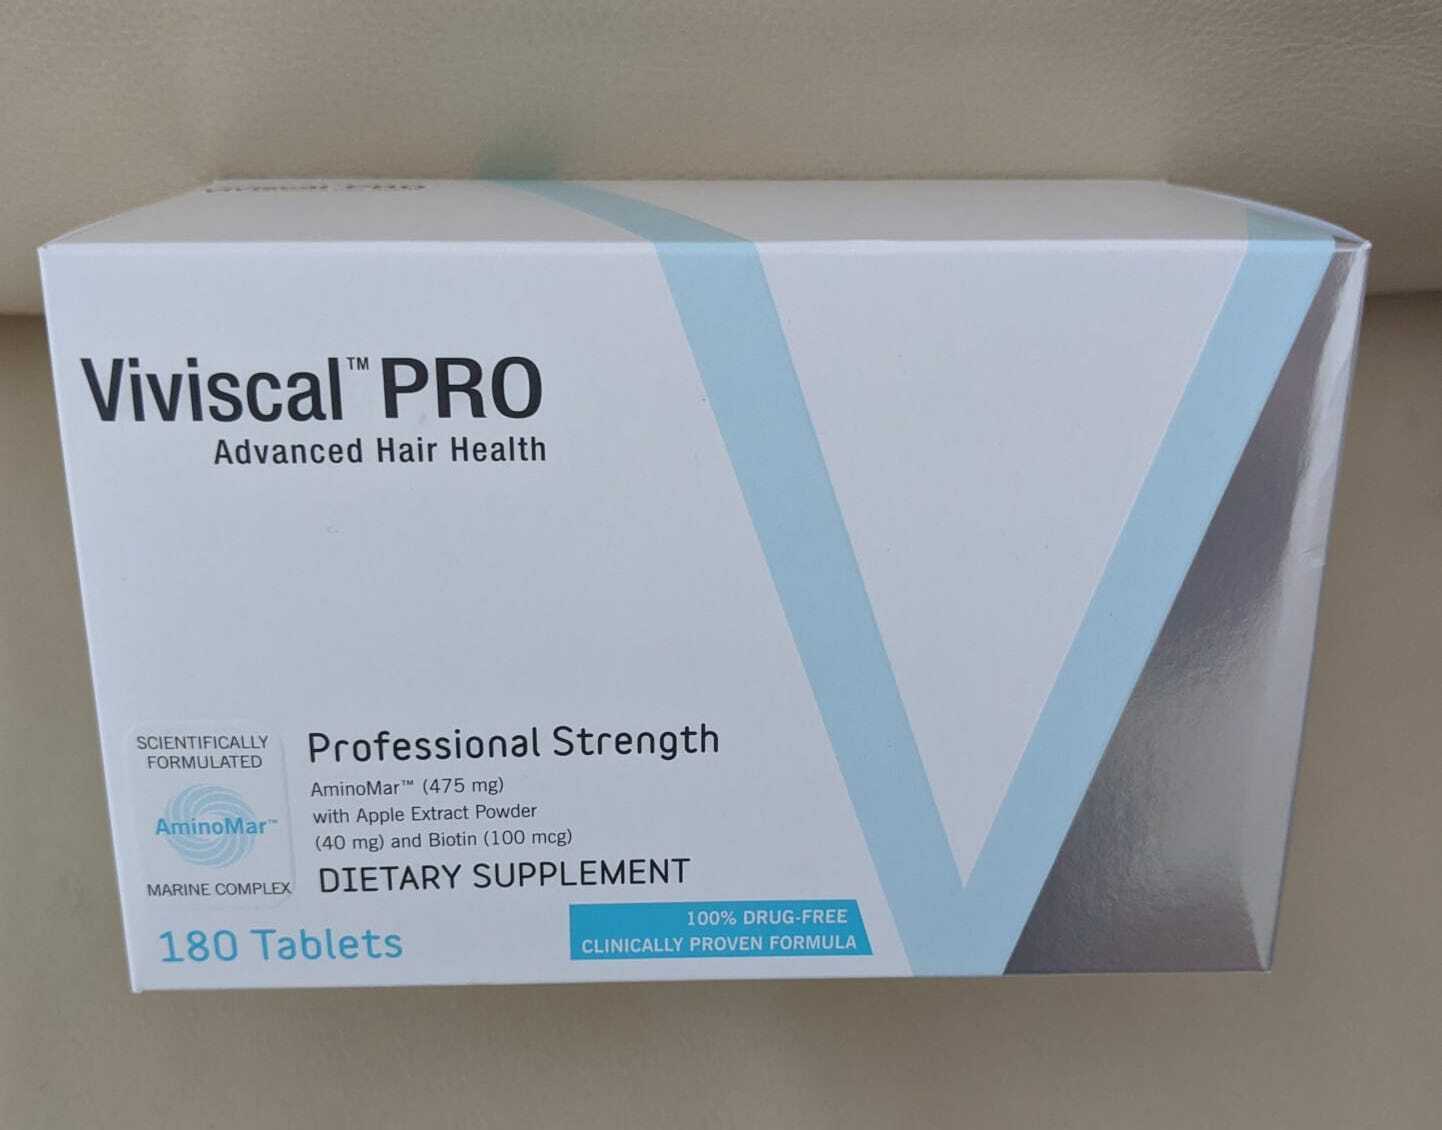 Viviscal Professional Hair Growth Supplement 180 Count. Expiry 12/2023 Viviscal